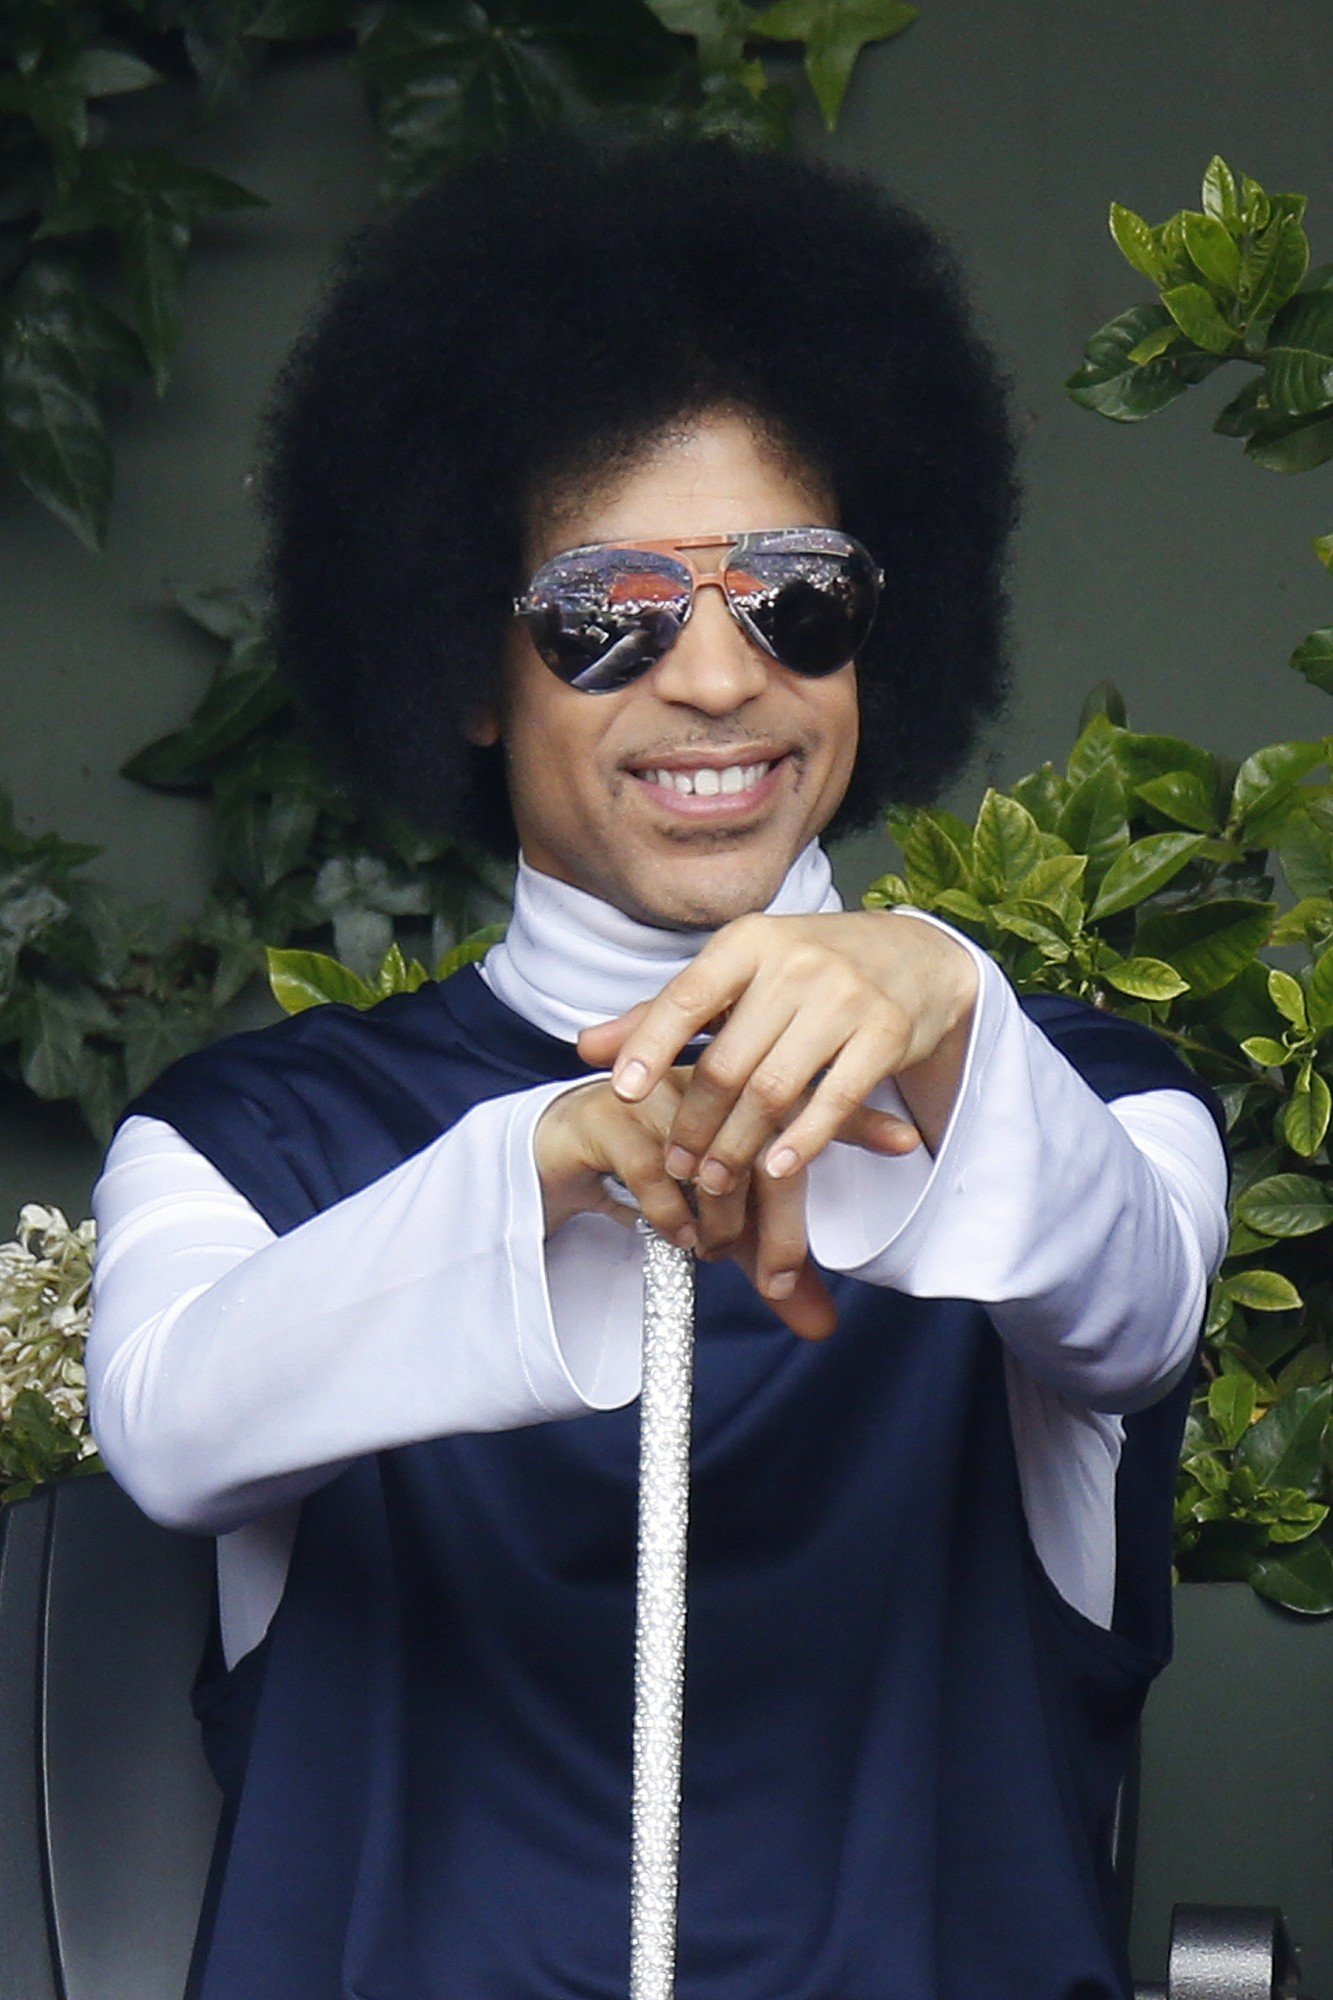 US singer Prince attends the French tennis Open round of sixteen match between Spain's Rafael Nadal and Serbia's Dusan Lajovic at the Roland Garros stadium in Paris on June 2, 2014. AFP PHOTO / KENZO TRIBOUILLARD (Photo credit should read KENZO TRIBOUILLARD/AFP/Getty Images)